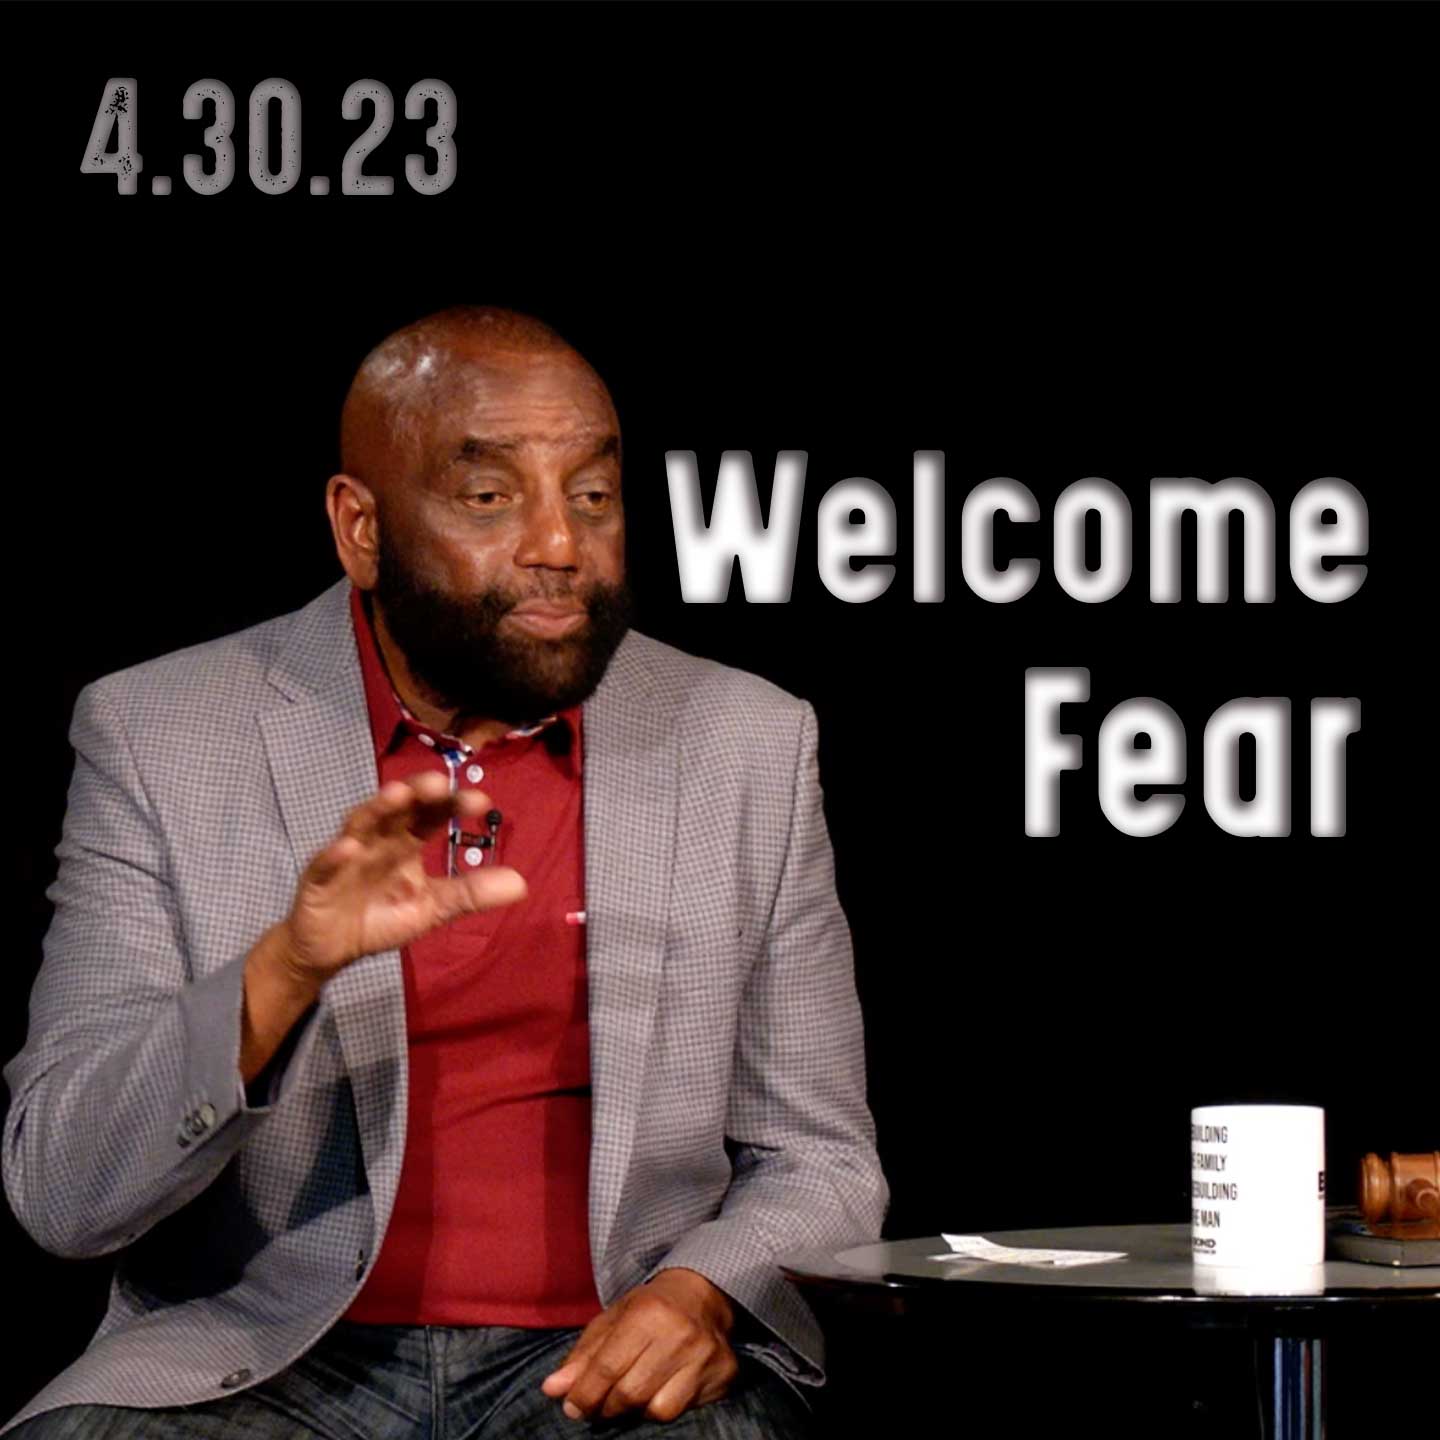 Why do you value your fear? Welcome fear. Church 4/30/23